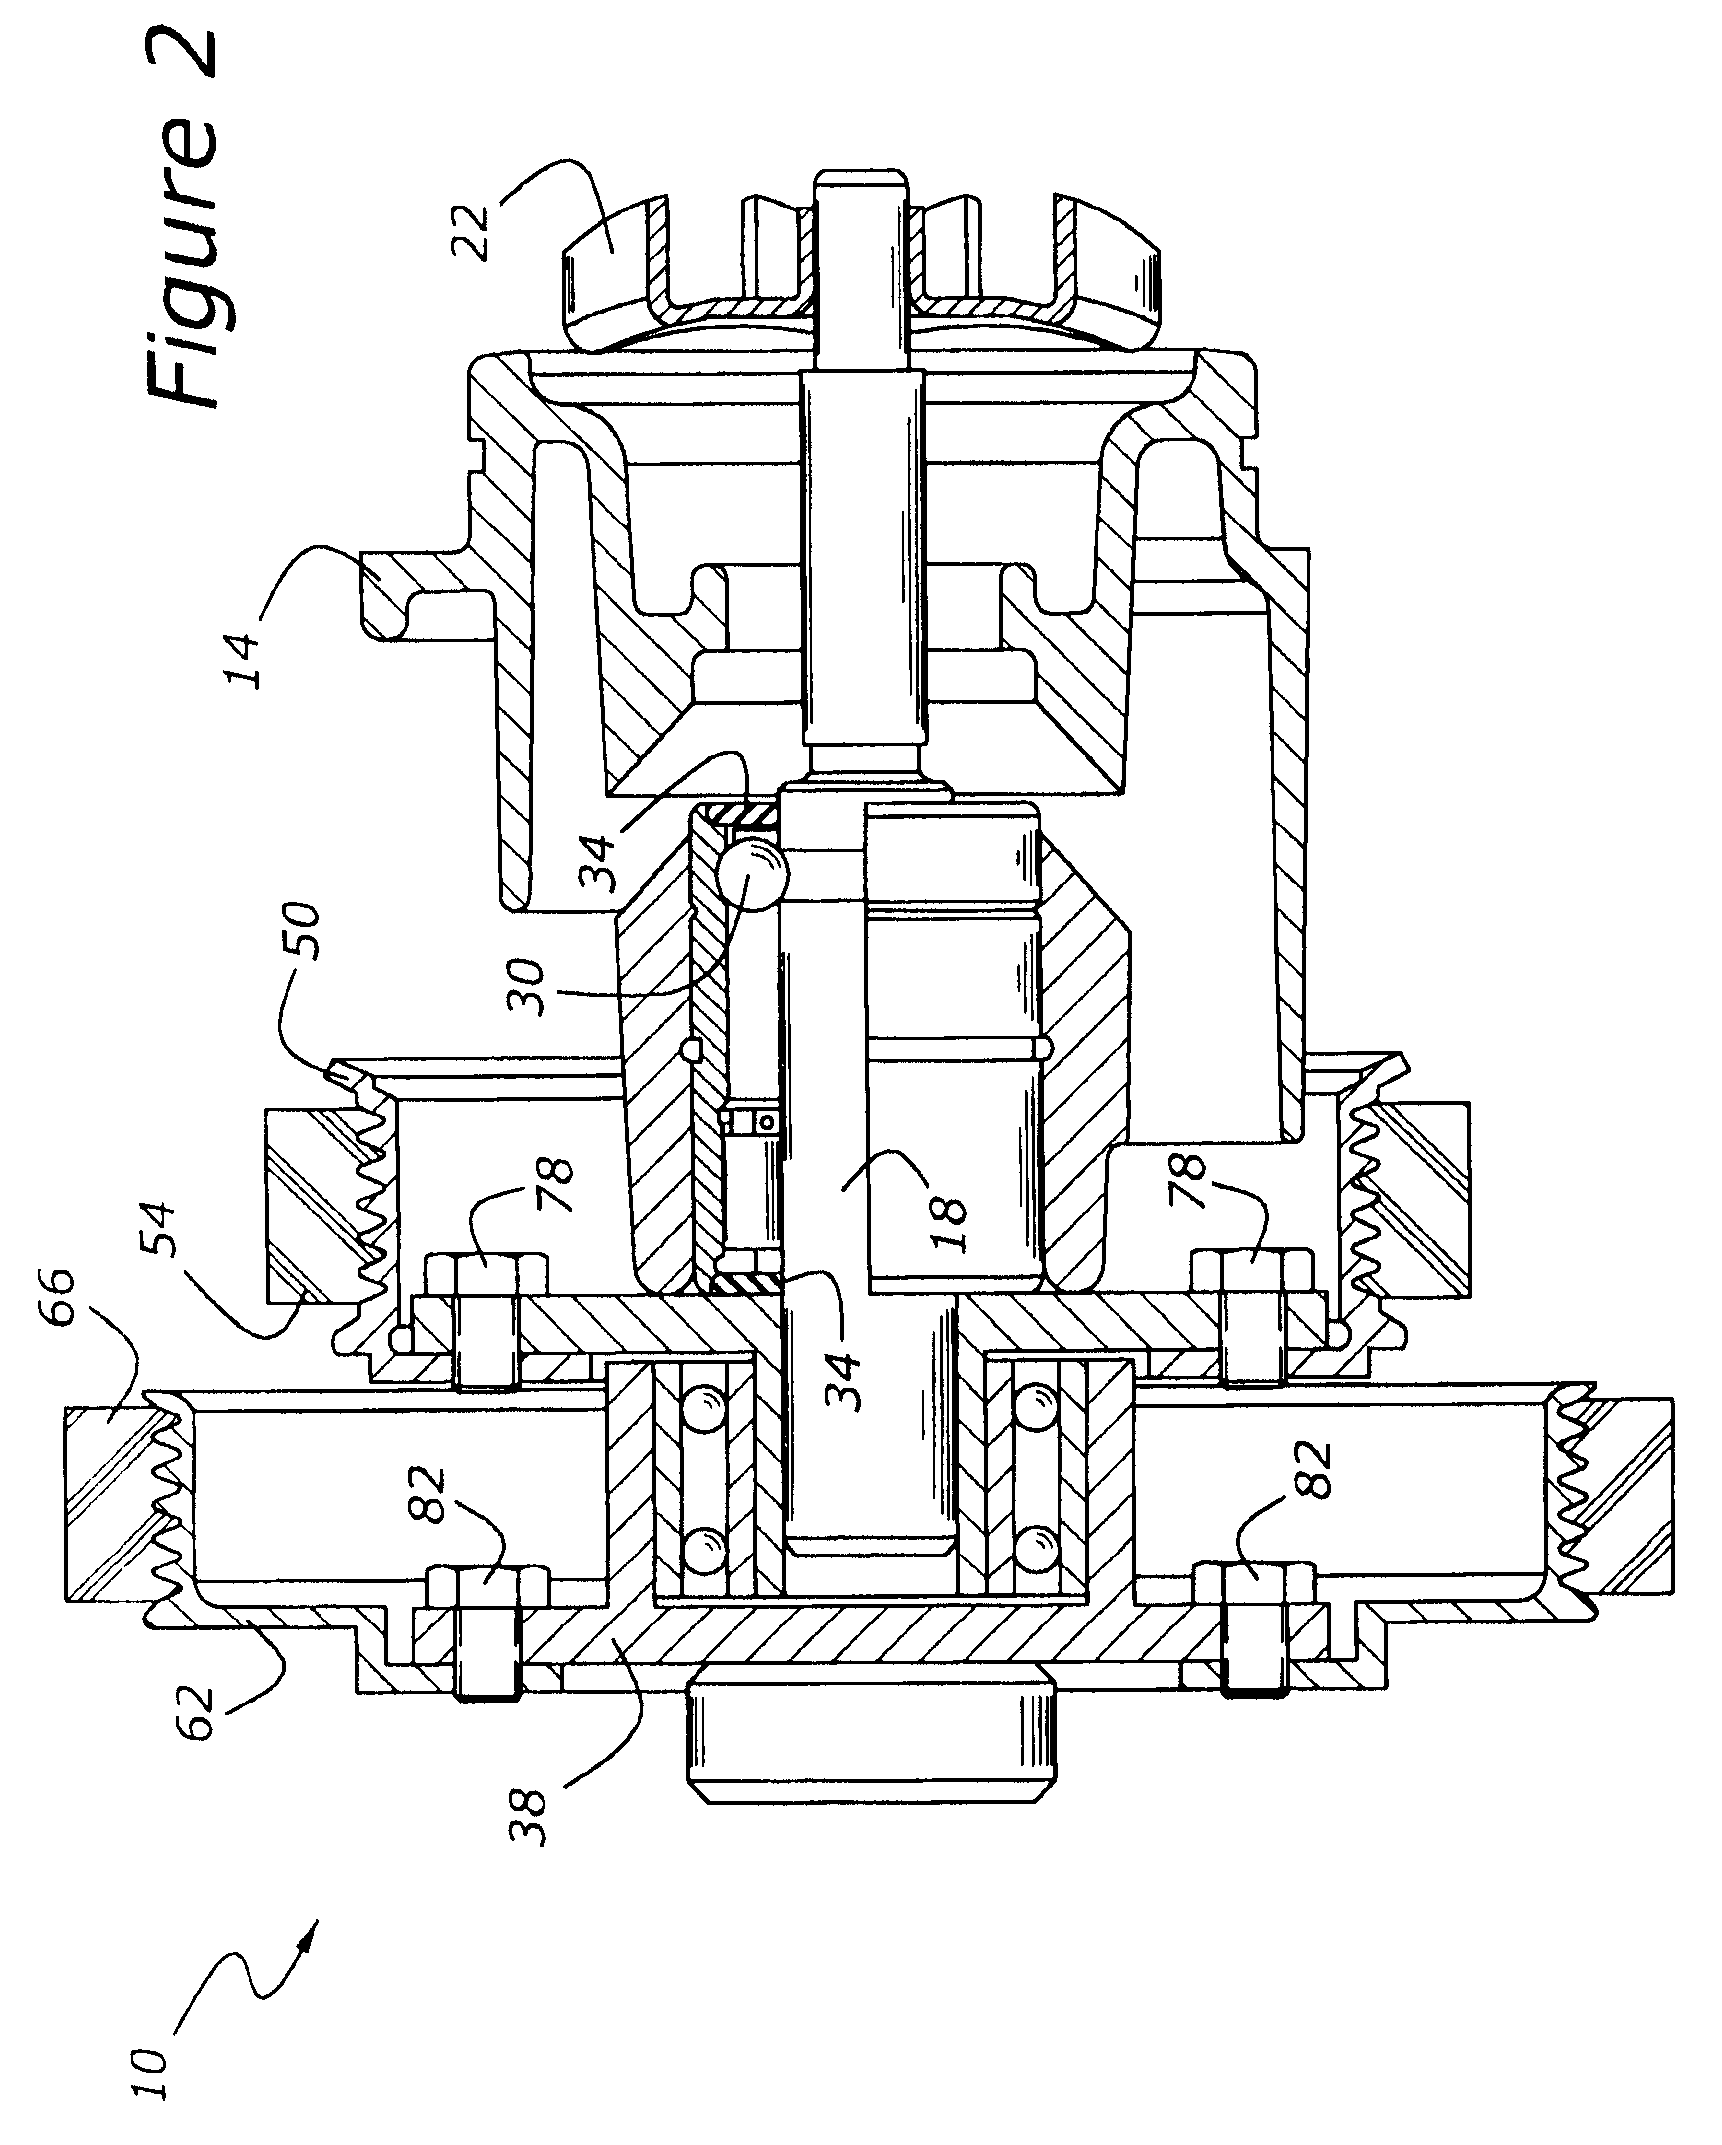 Dual drive radiator fan and coolant pump system for an internal combustion engine